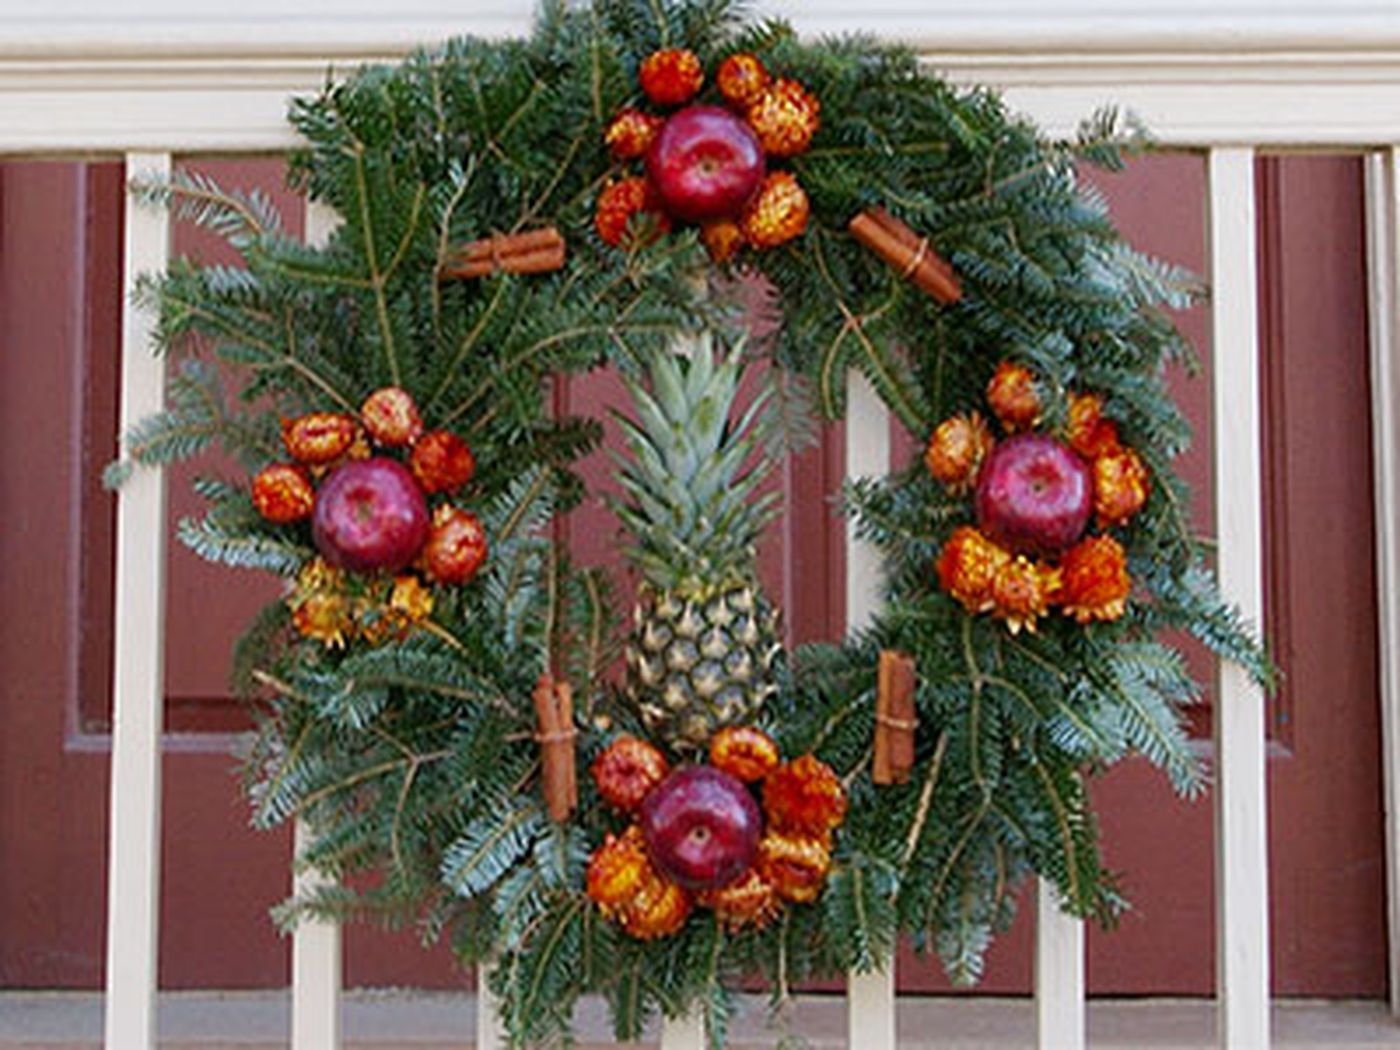 The Wreaths of Colonial Williamsburg Old House